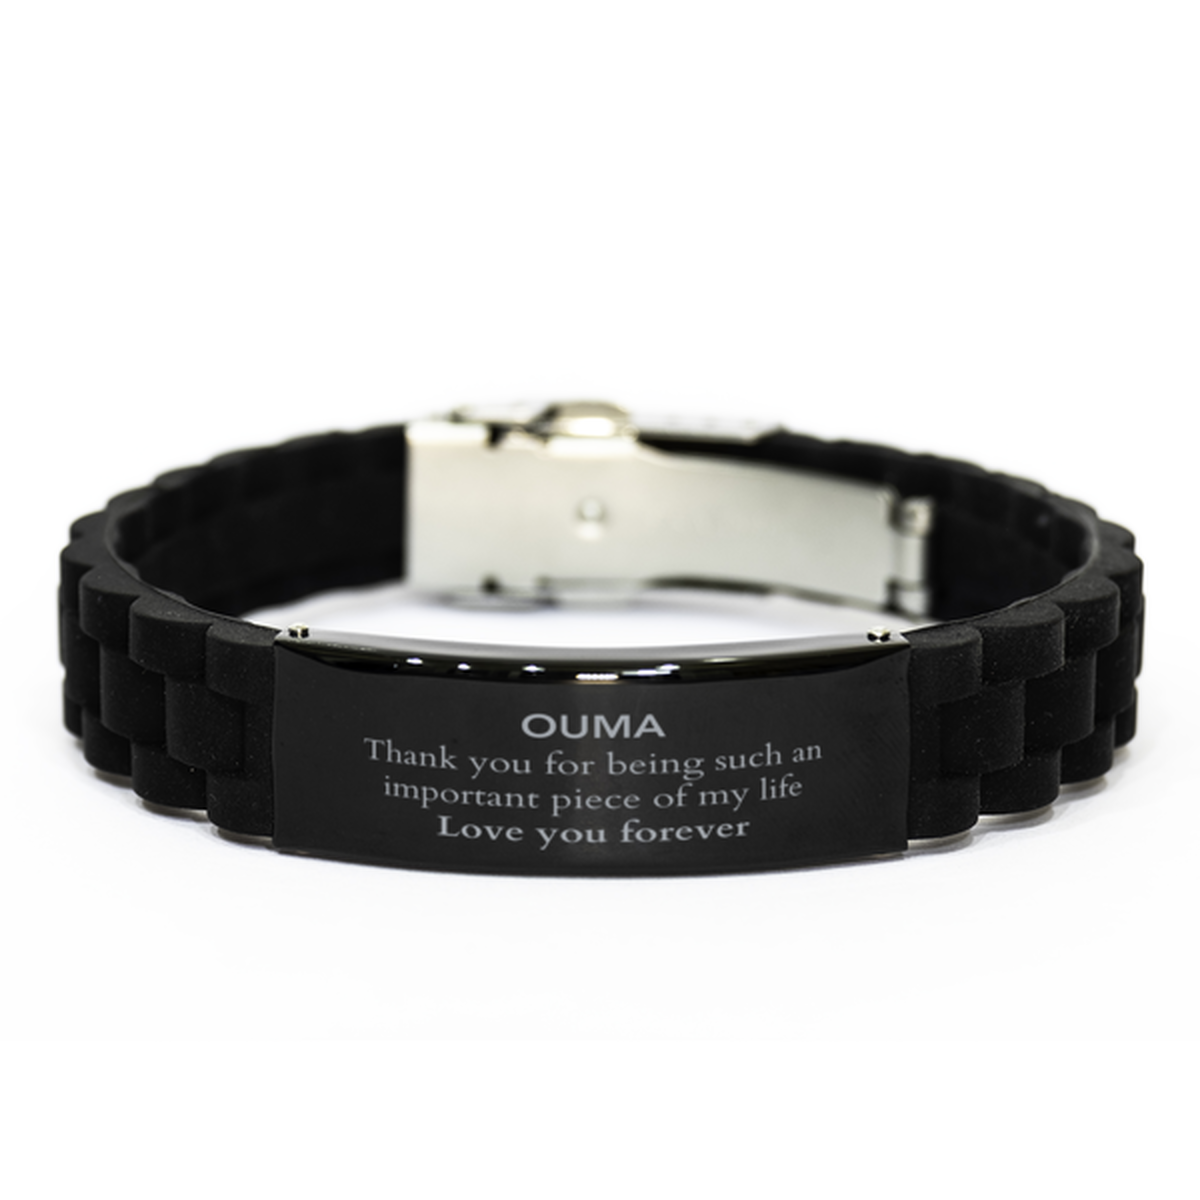 Appropriate Ouma Black Glidelock Clasp Bracelet Epic Birthday Gifts for Ouma Thank you for being such an important piece of my life Ouma Christmas Mothers Fathers Day